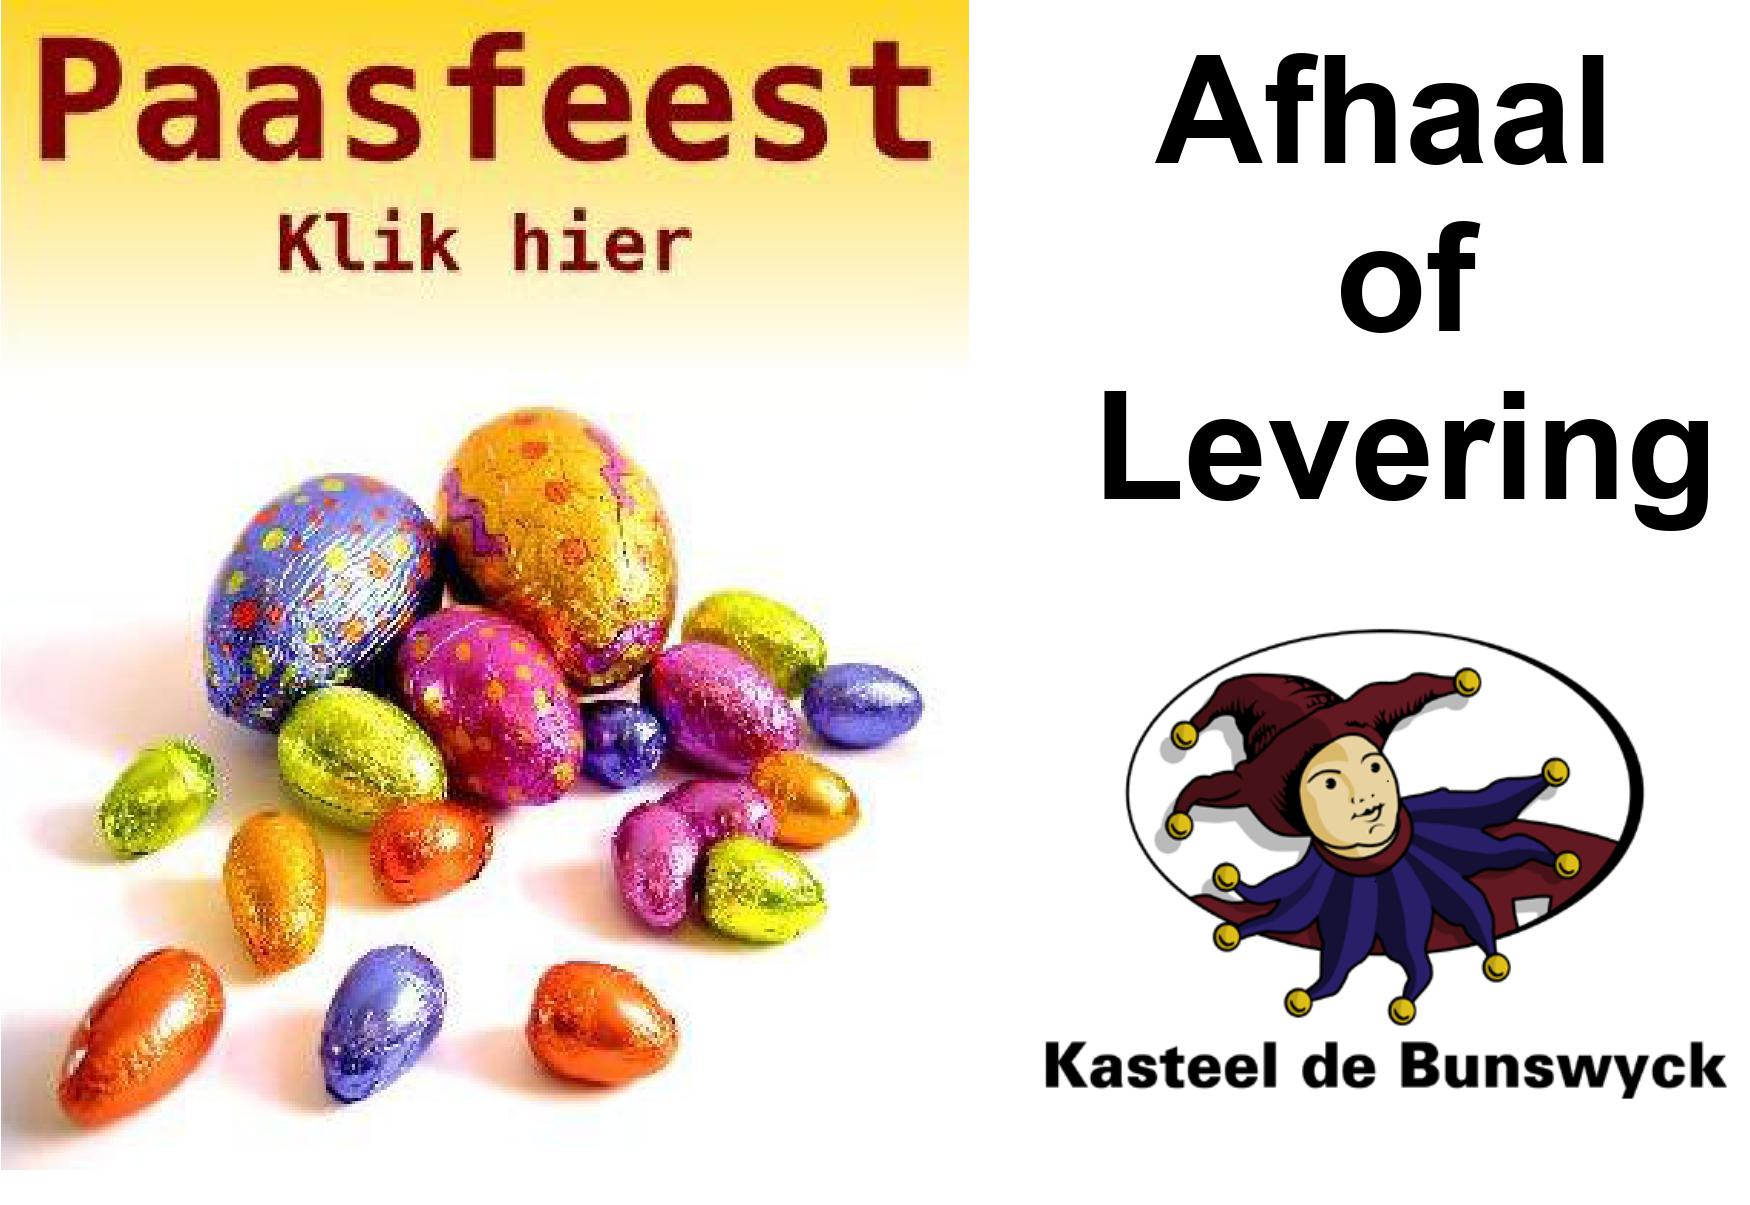 Paasfeest afhaal of levering